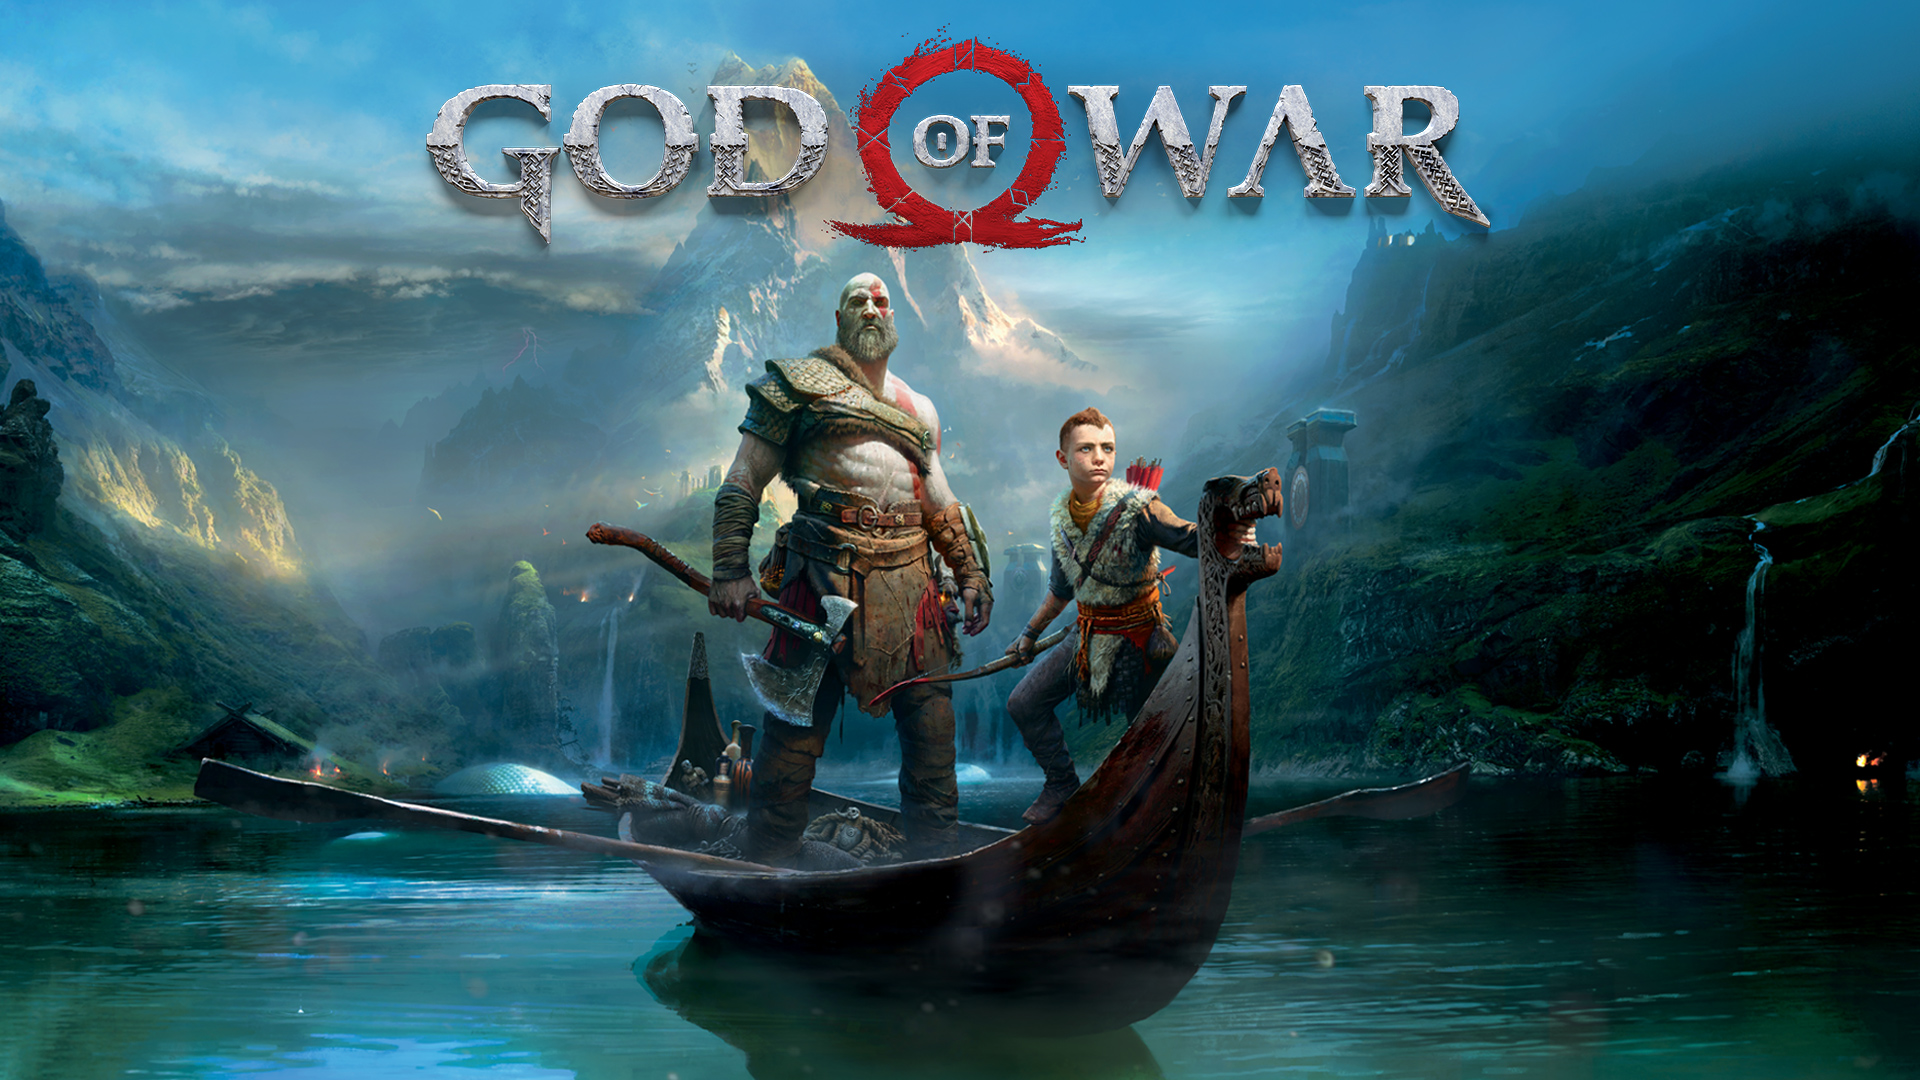 God of war feature image